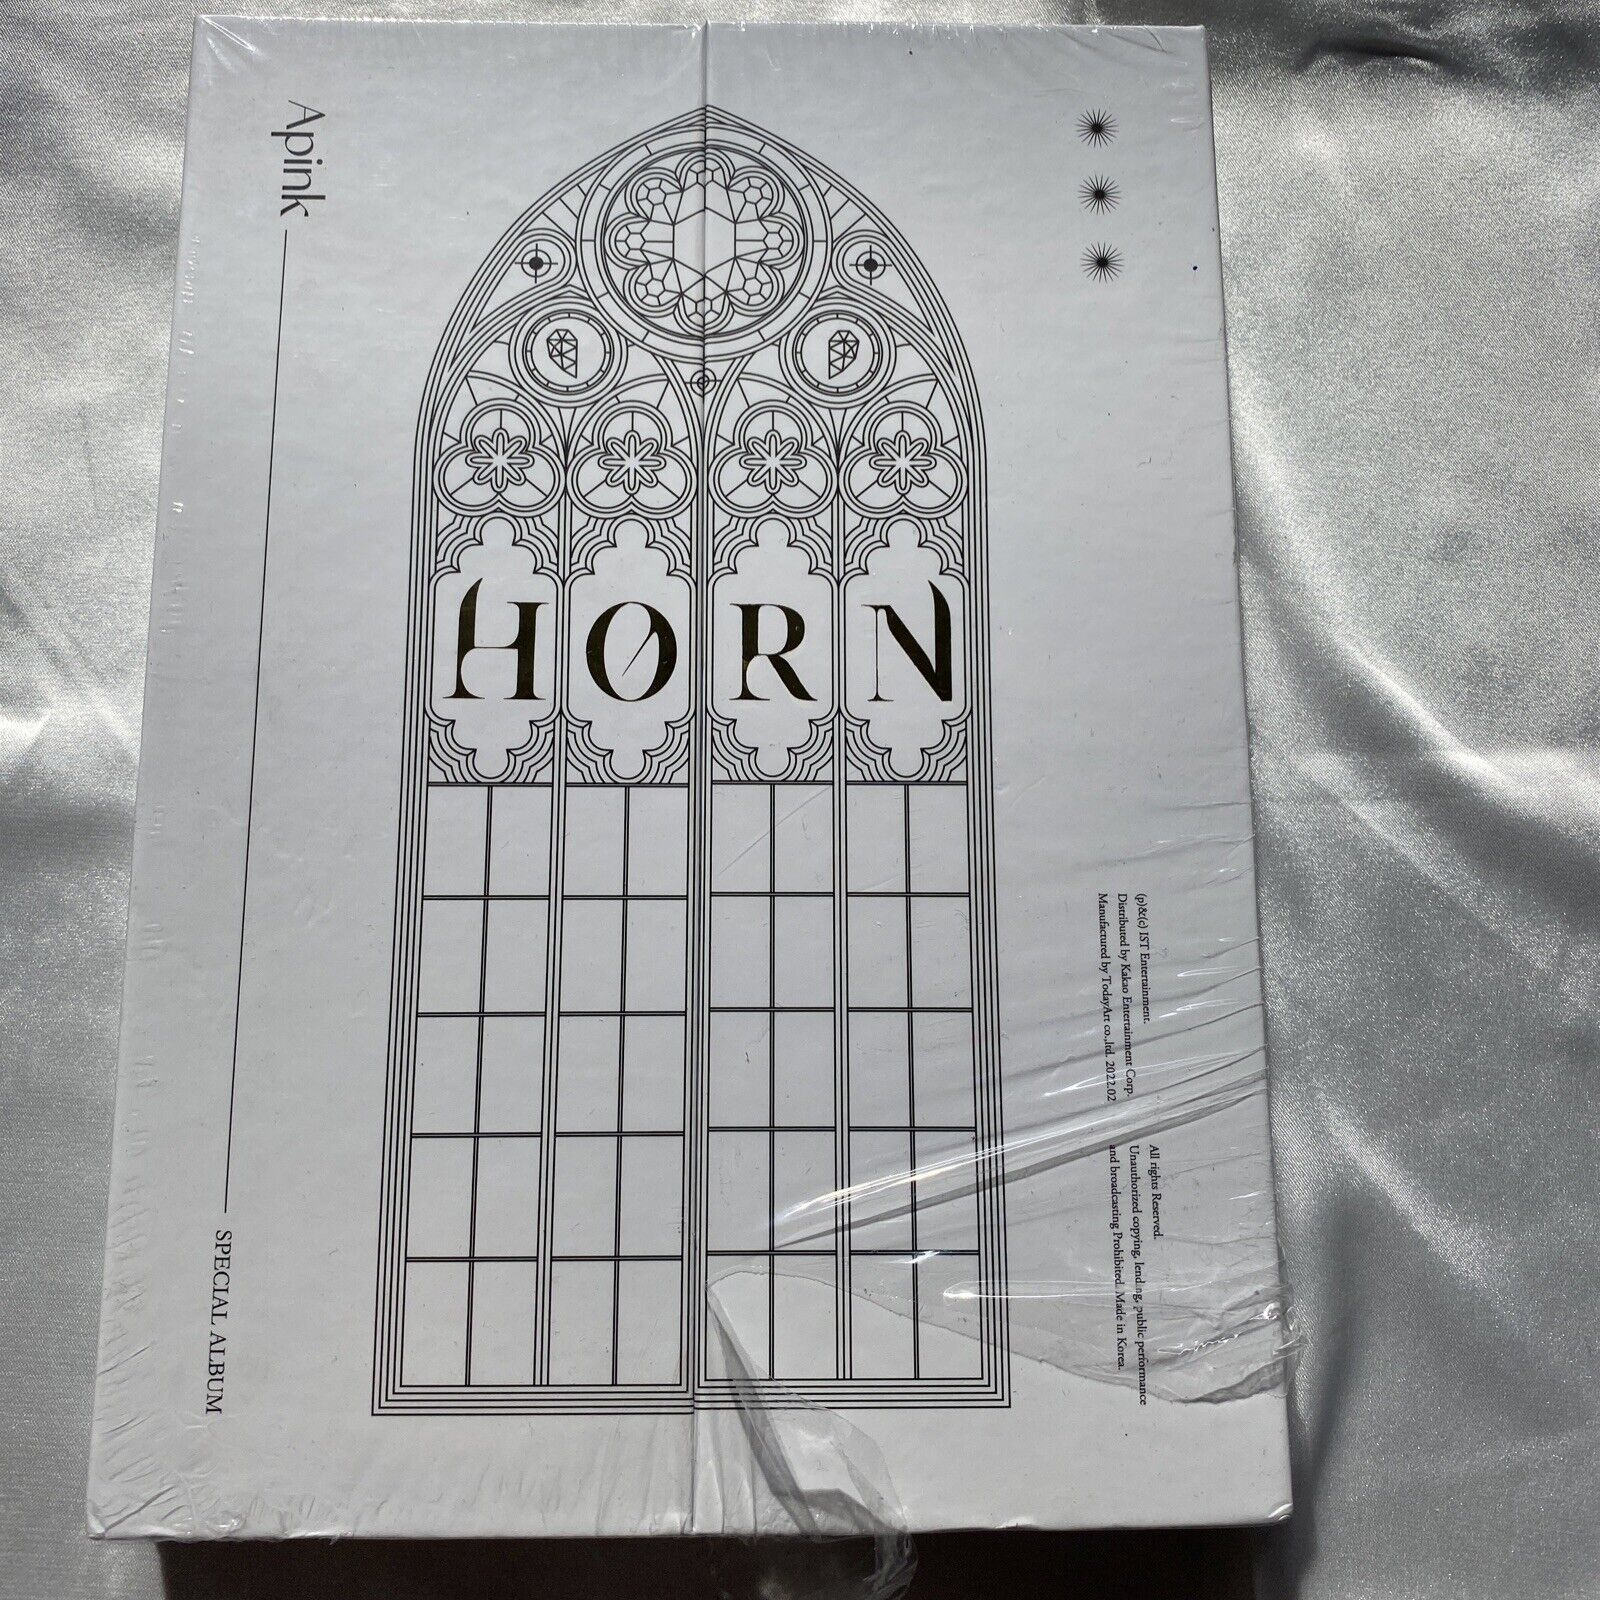 APINK [HORN] Special Album CD+POSTER+PhotoBook+Card New With Torn Plastic Seal